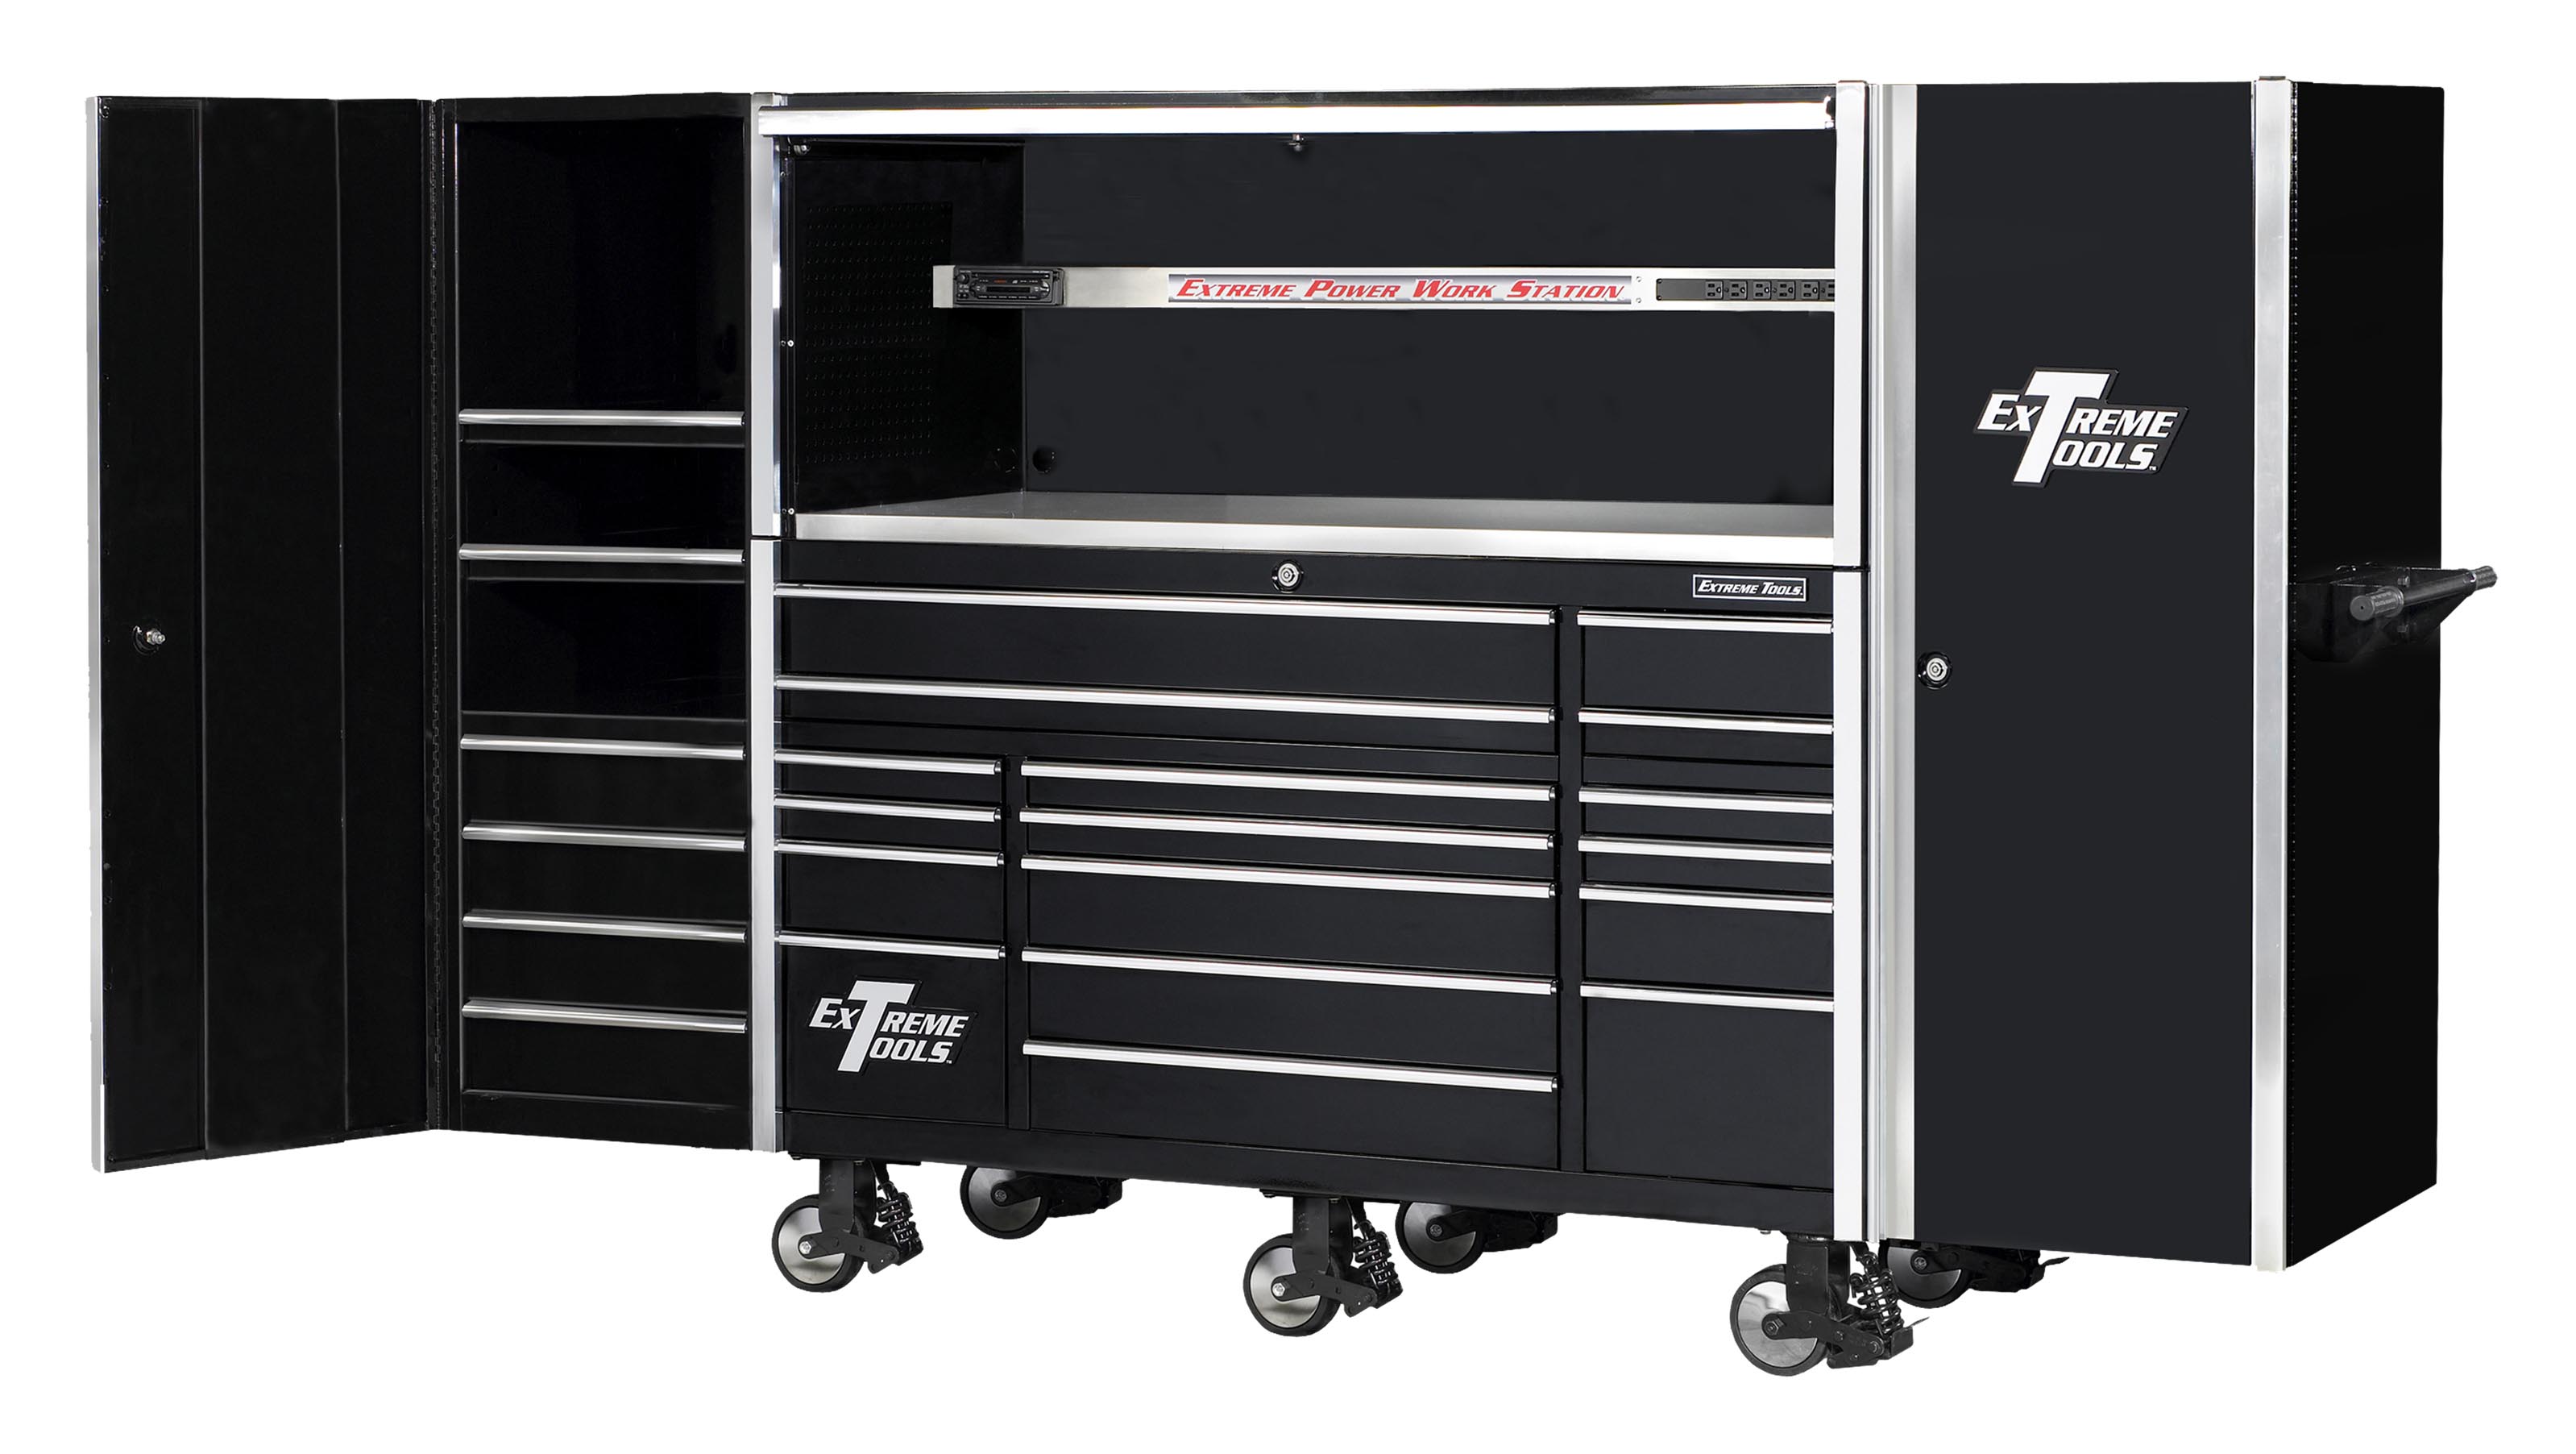 Extreme Tools® 72" Professional Power Workstation Hutch